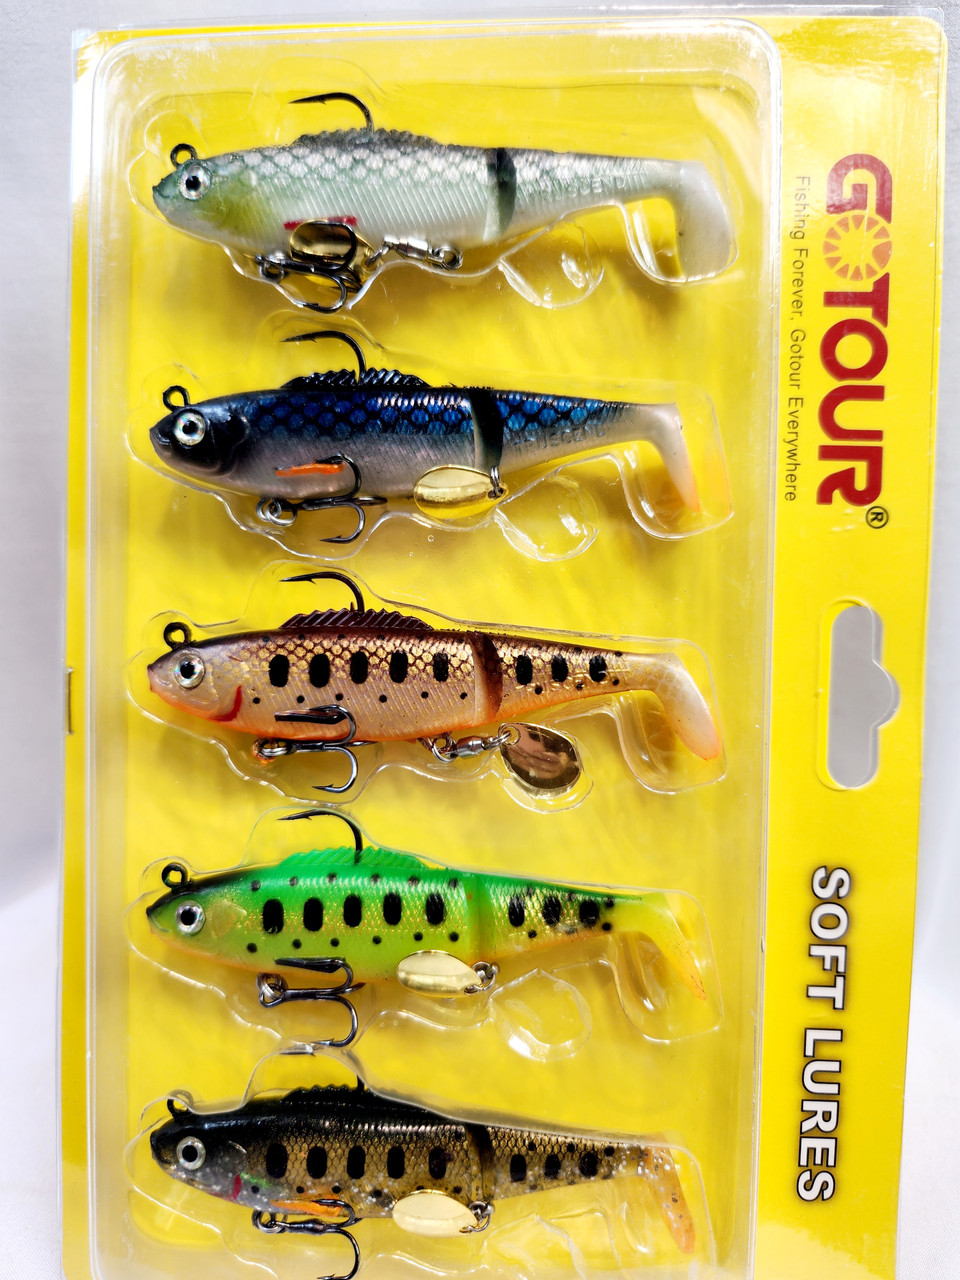 GOTURE Soft Fishing Lures - Father Joe's Villages